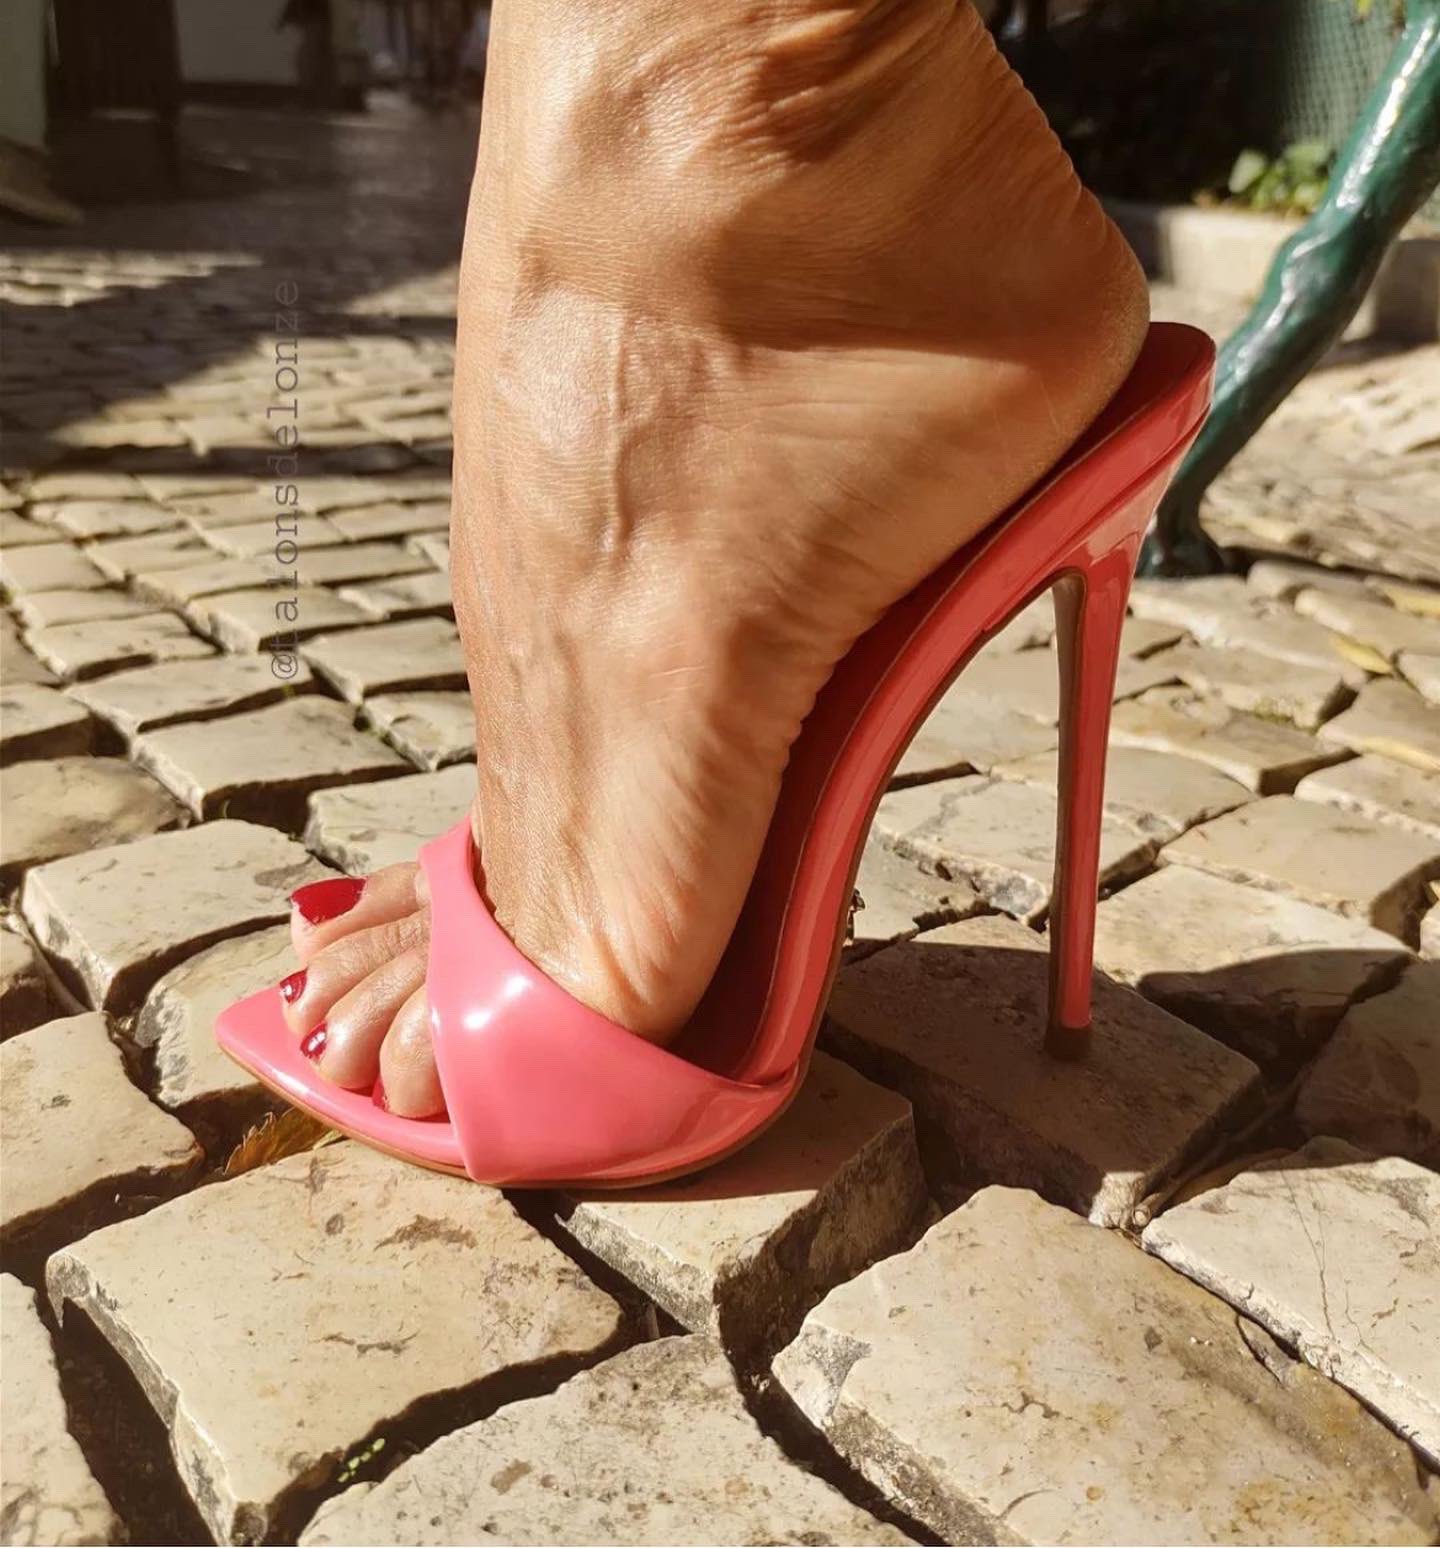 saralilasmassimo_us on X: "This pair of shoes can be worn as a high heel  mule or a high heel sandals making it a 2 in 1 shoe, how amazing is that ?